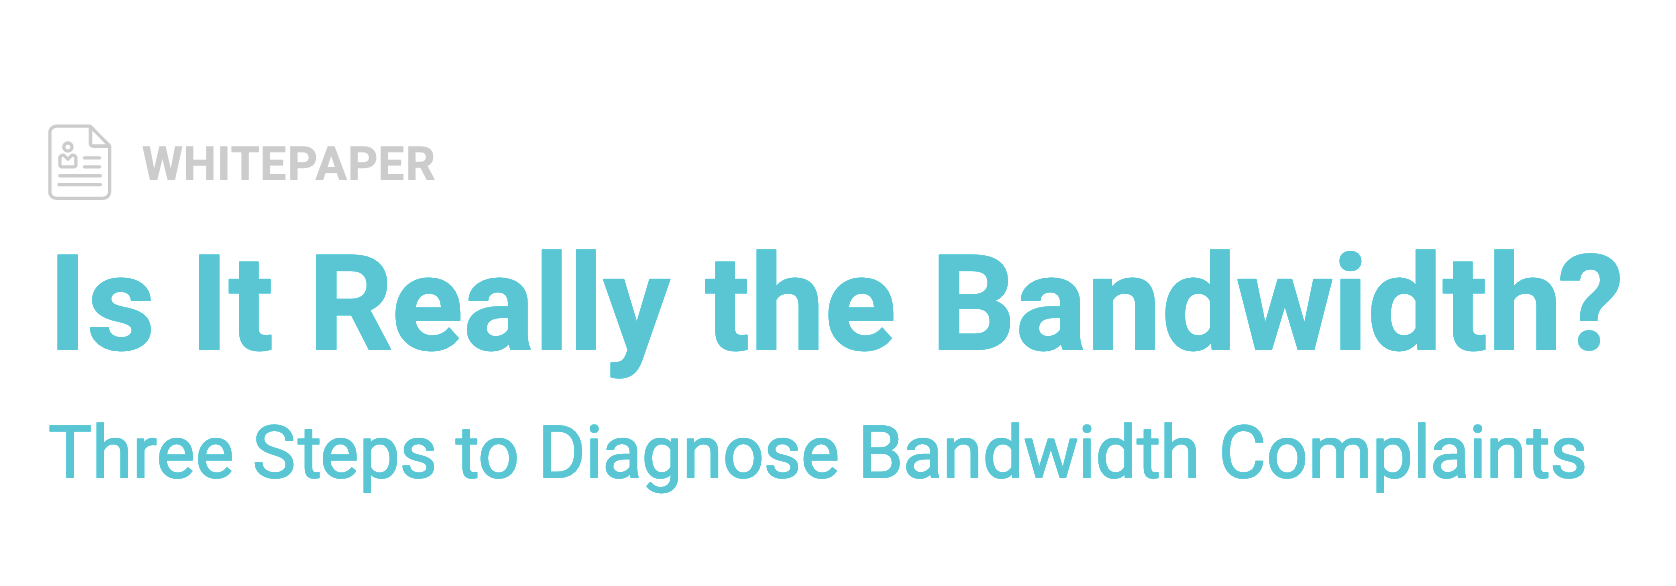 Is it Really The Bandwidth?